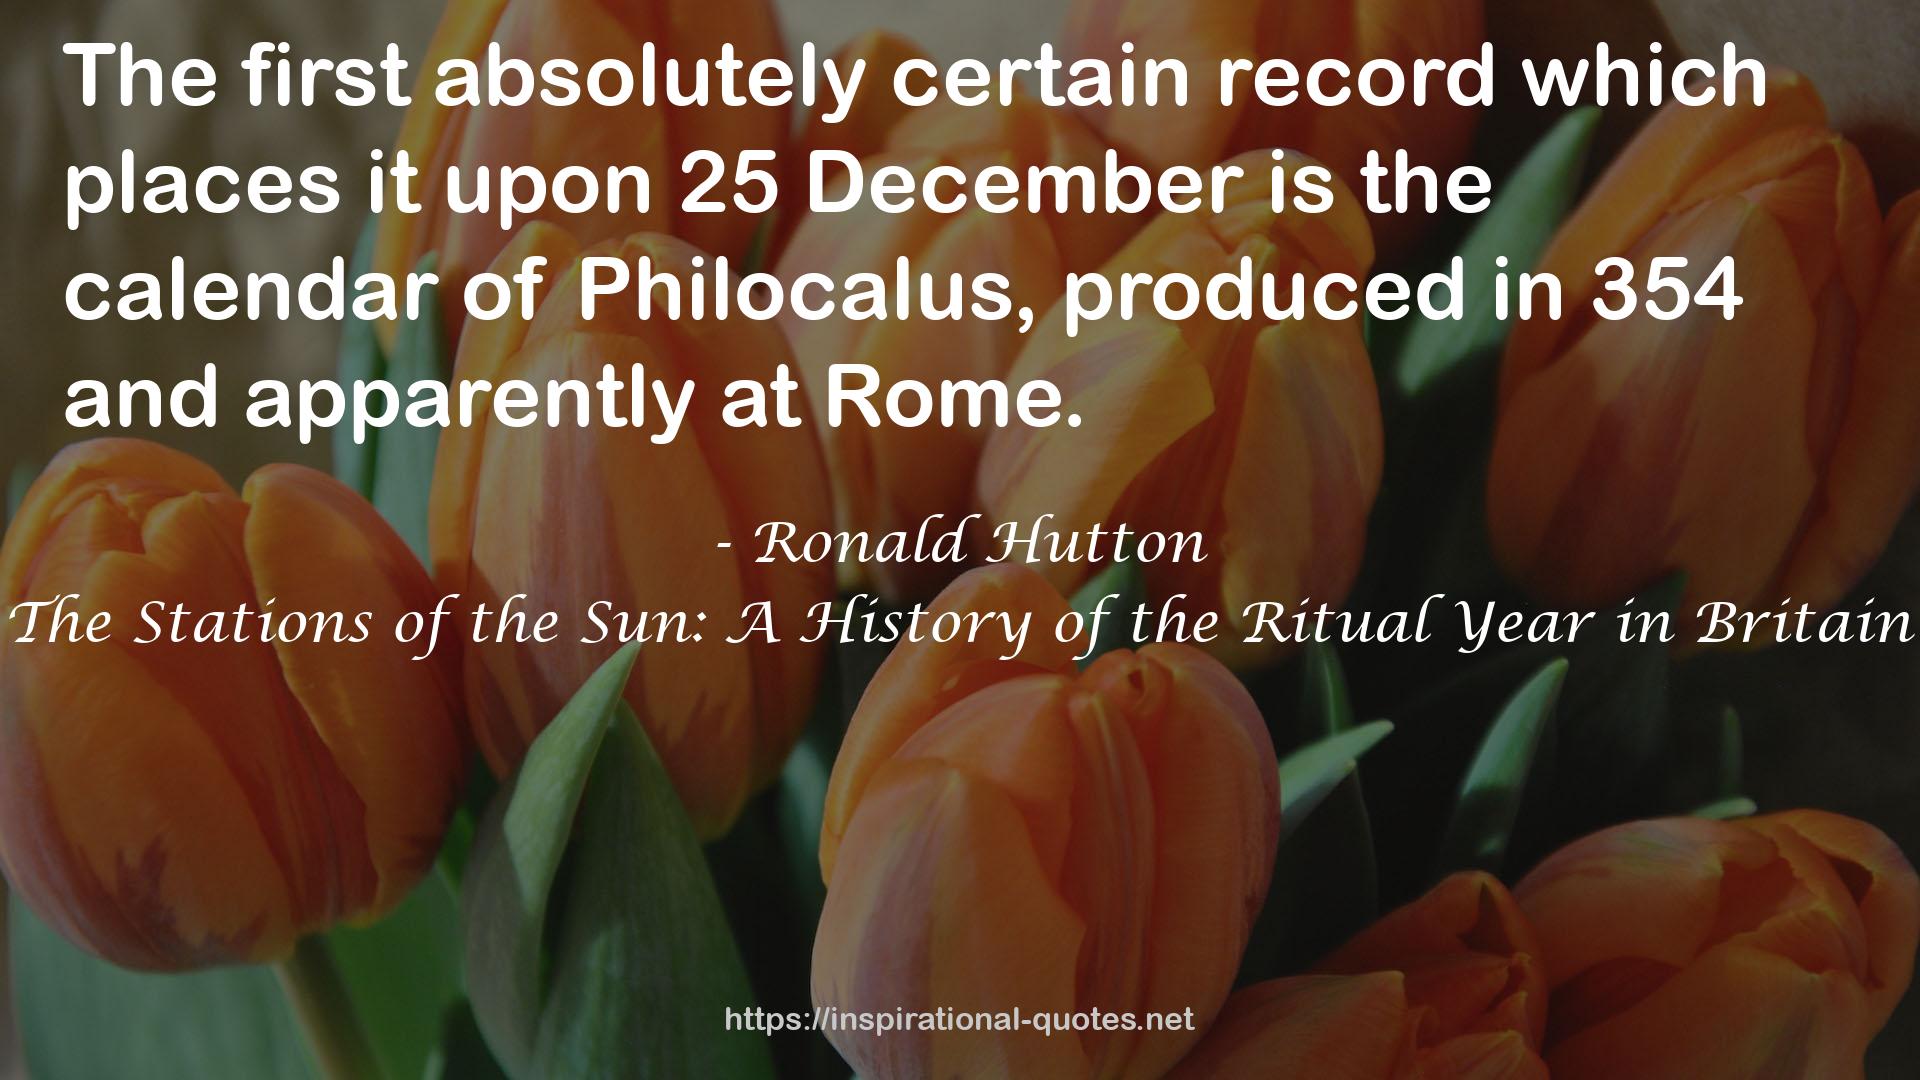 The Stations of the Sun: A History of the Ritual Year in Britain QUOTES